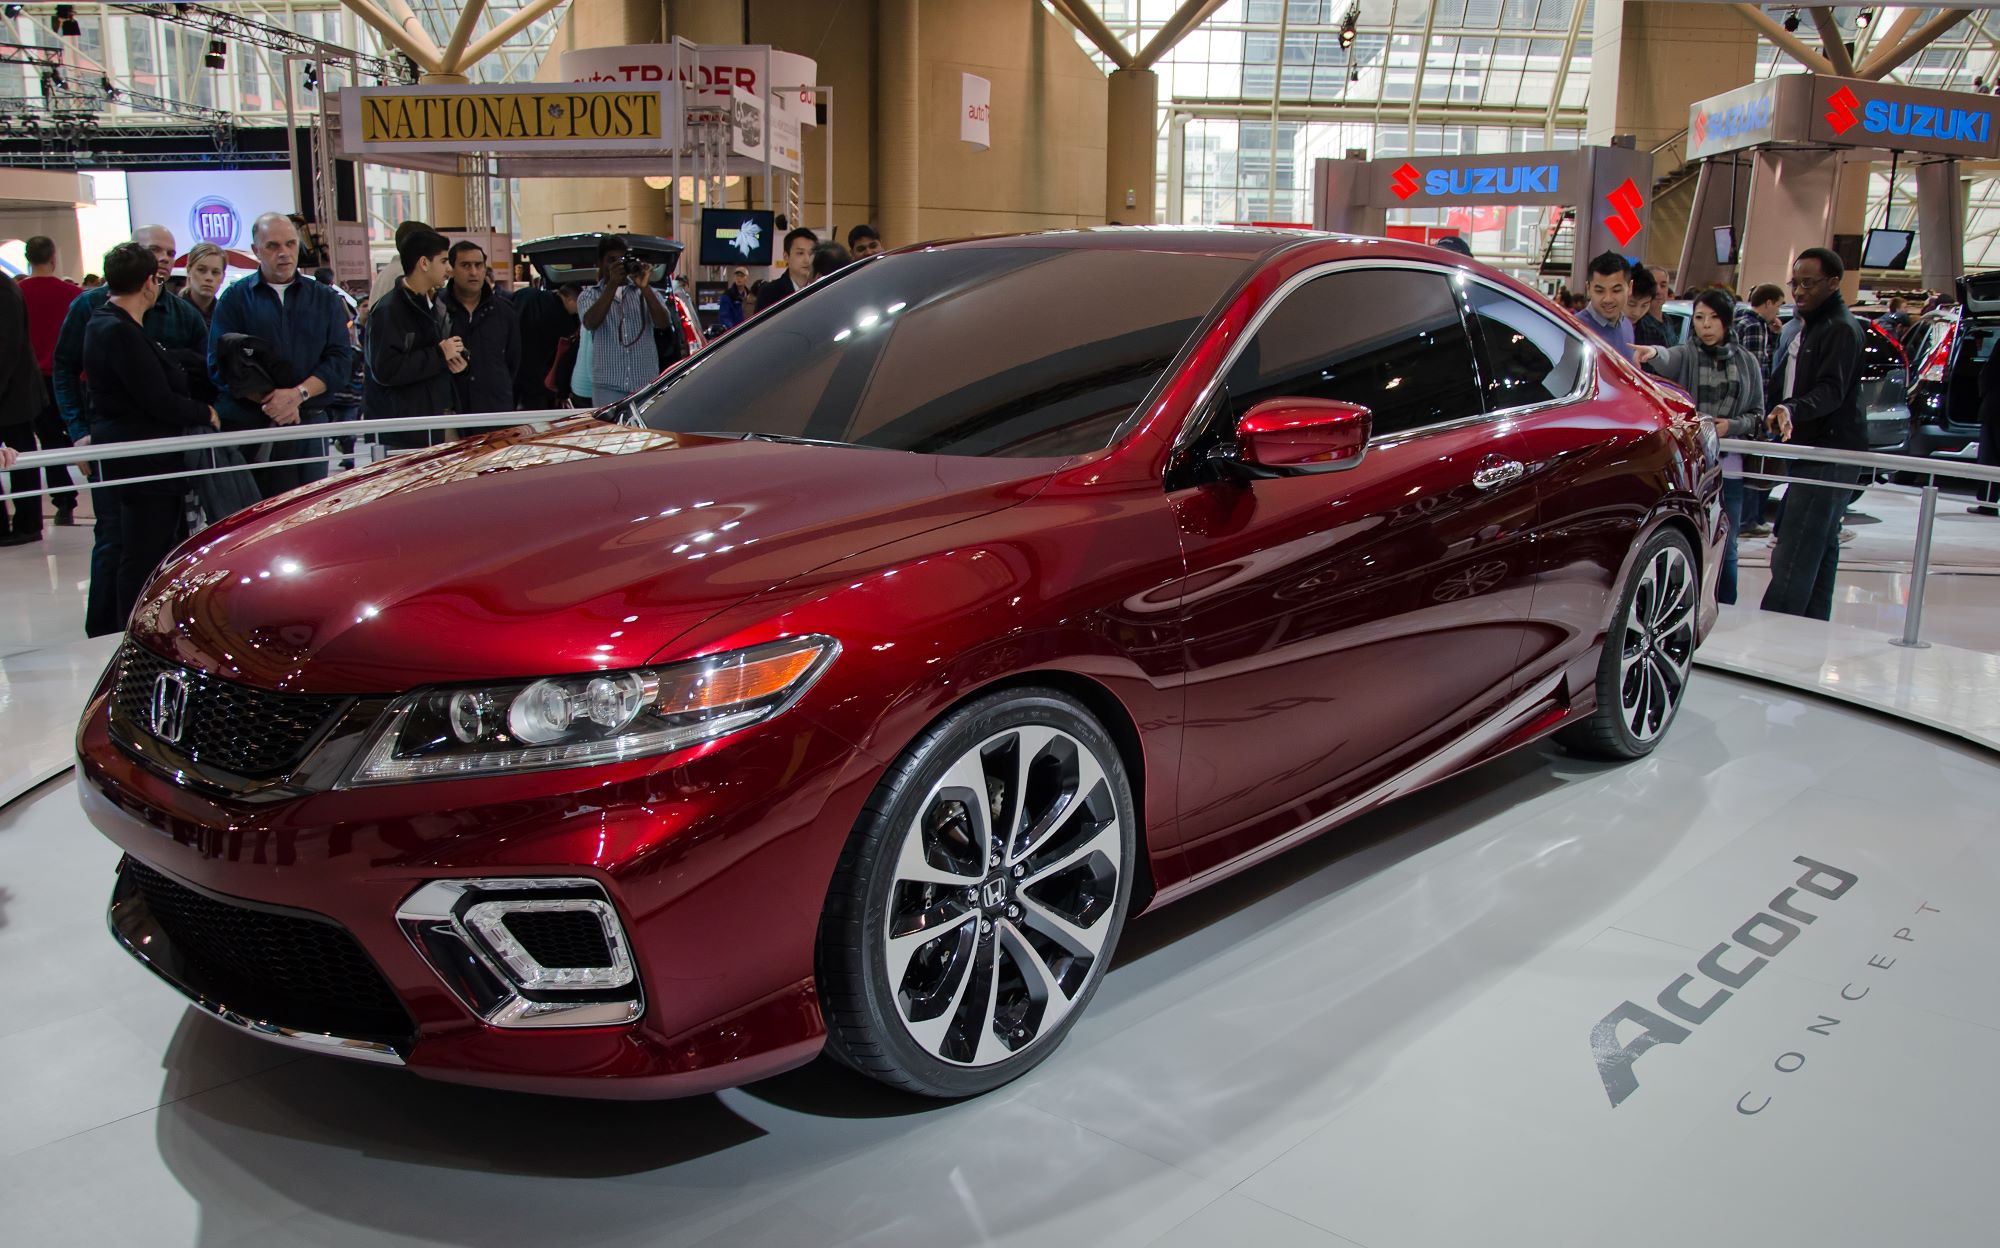 A red 2013 Honda Accord sitting indoors.